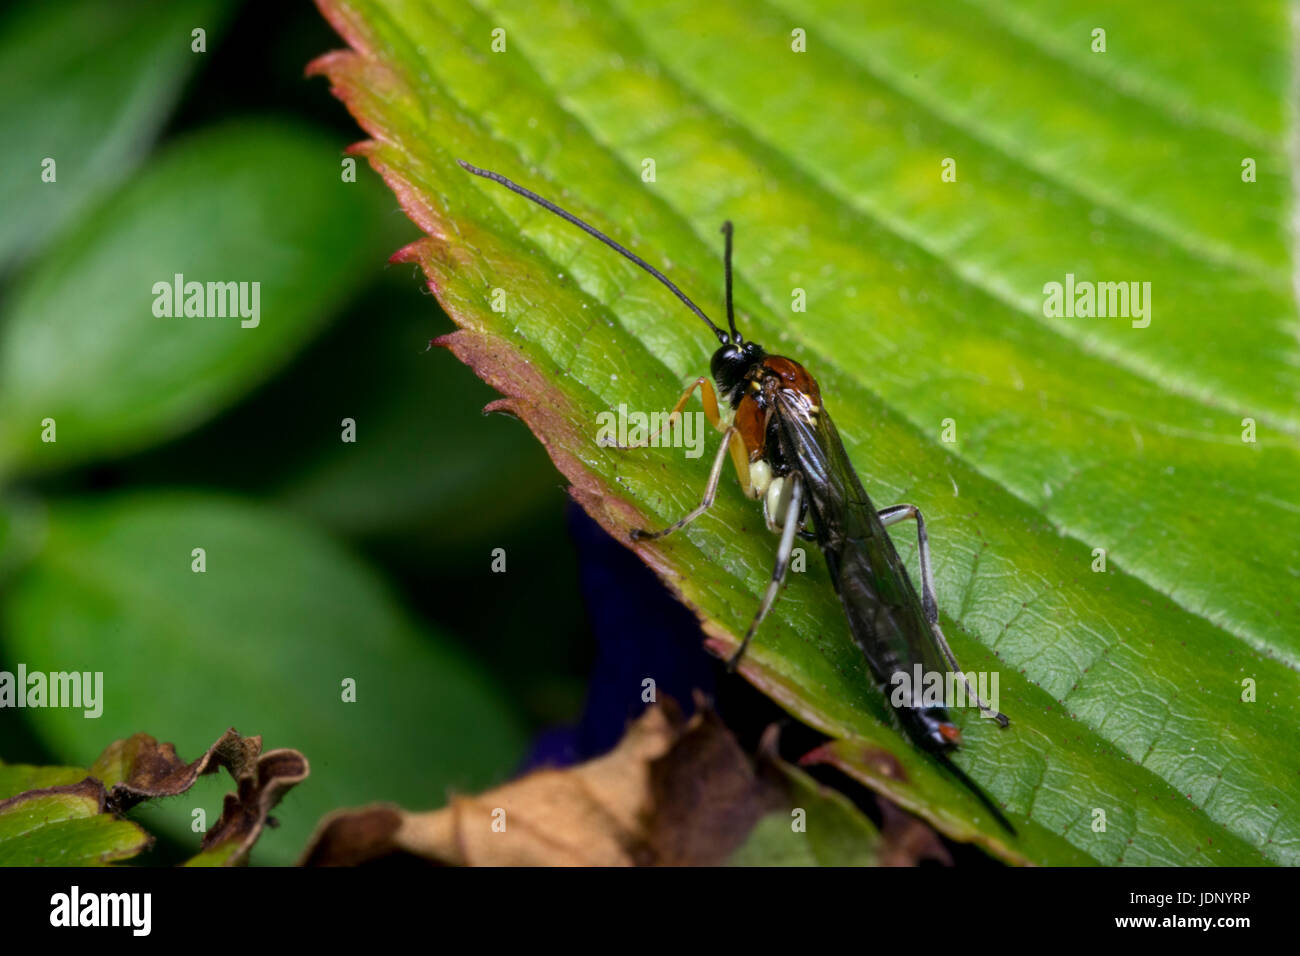 Braconidae wasp on a leaf in the wild Stock Photo